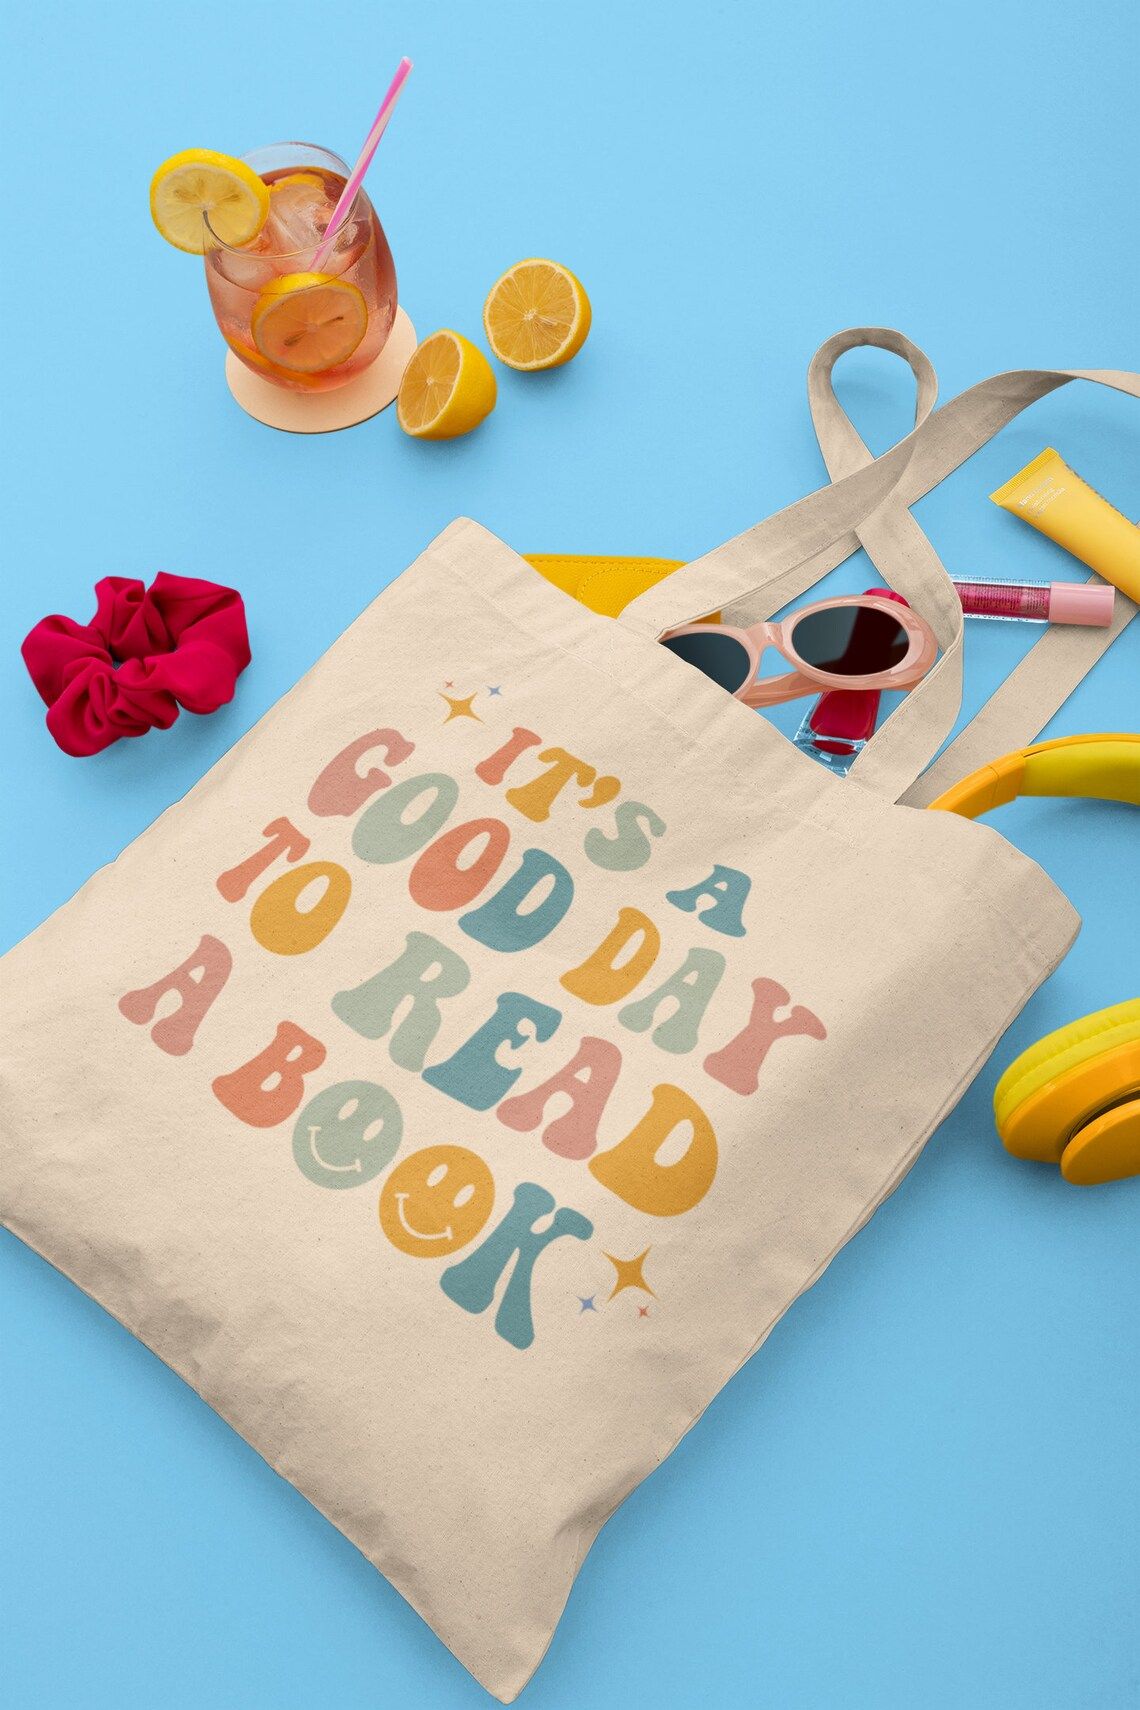 Canvas tote with groovy font reading "it's a good day to read a book."